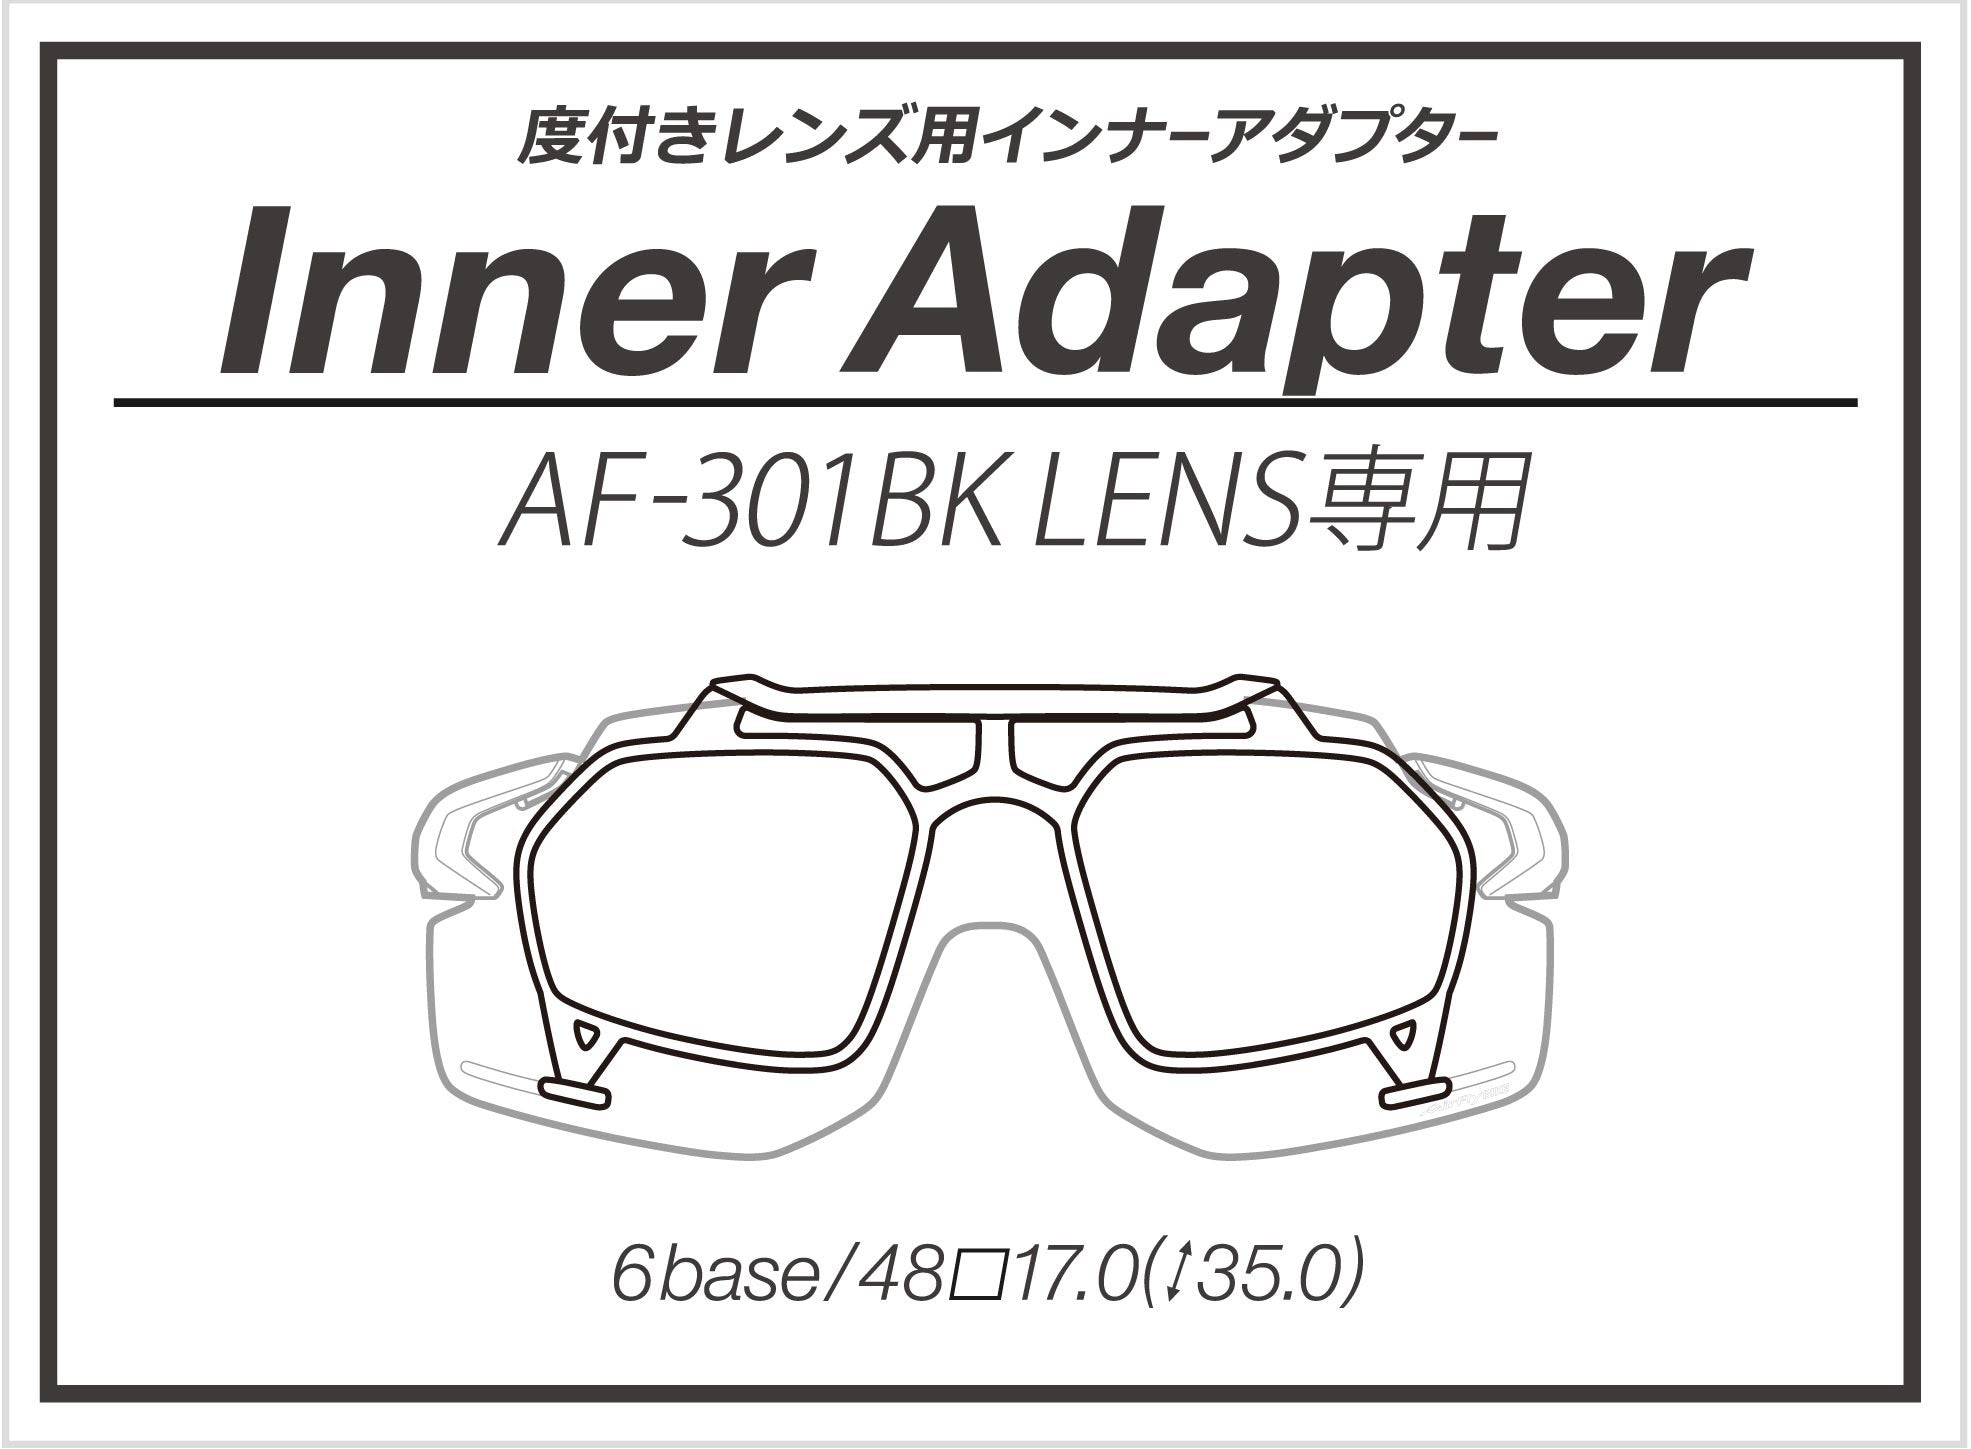 AirFly - AF301 Bike-TR C5(Trail Pink Mirror Lens)【Limited Edition】